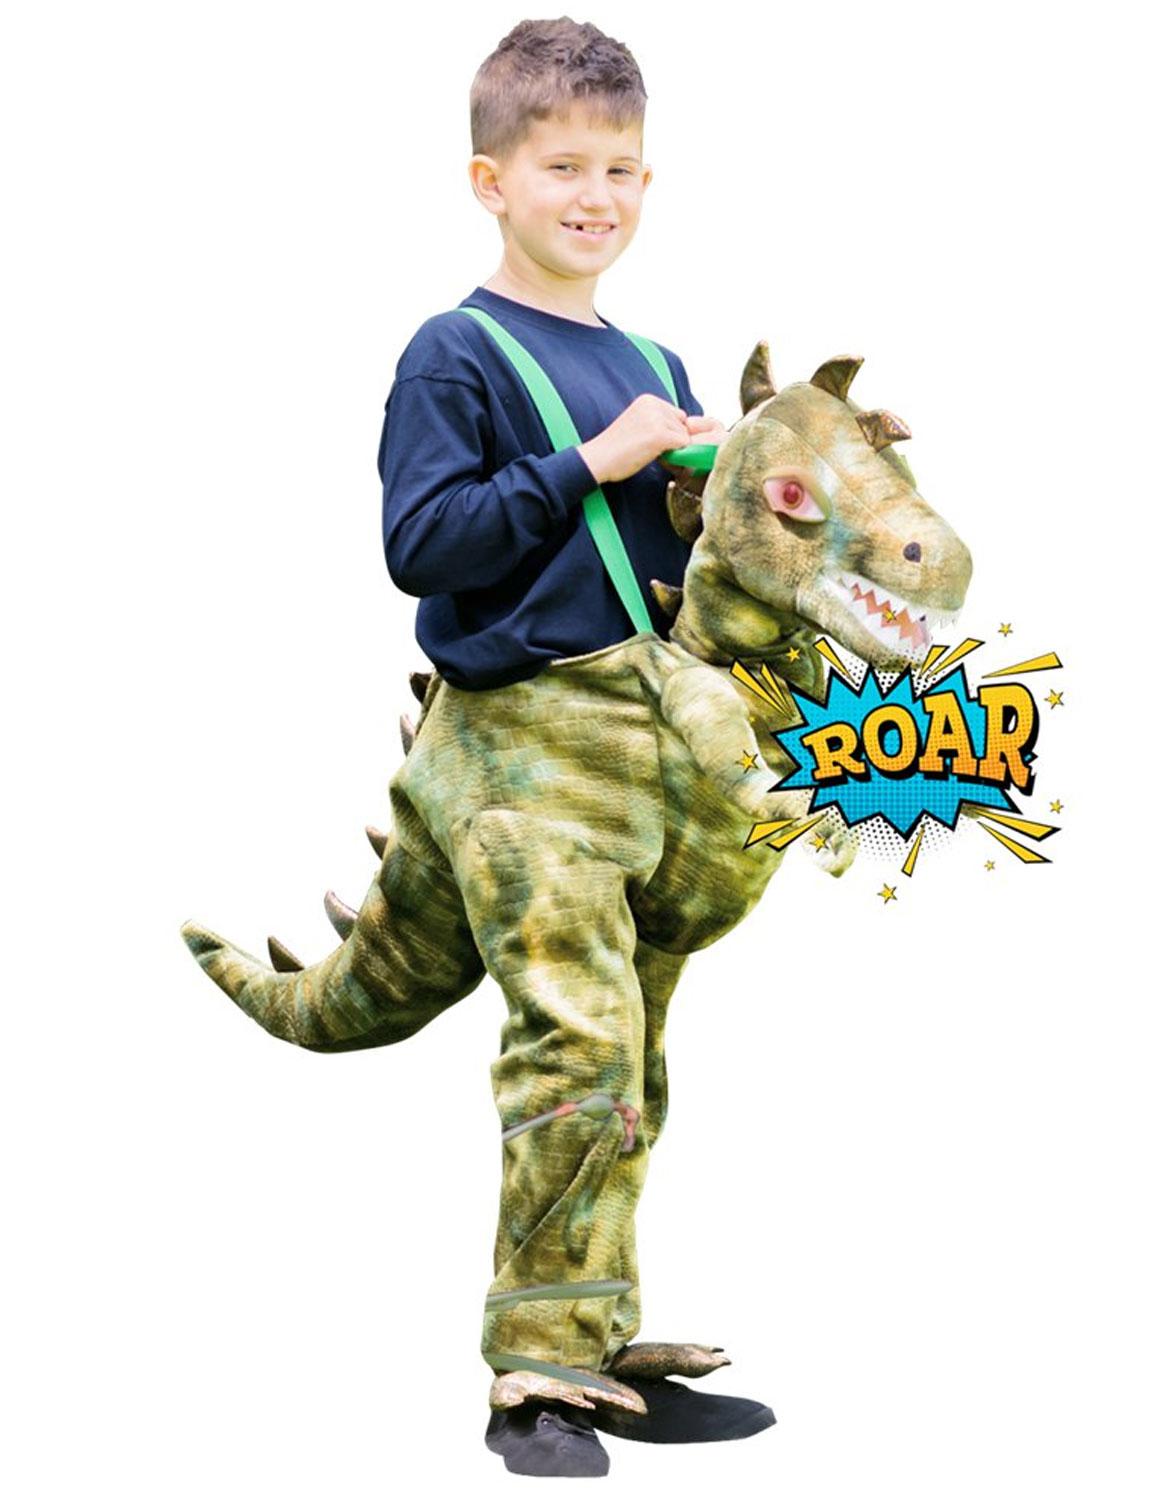 Deluxe Light & Sound Ride In Dinosaur by Amscan RD16-LS available here at Karnival Costumes online party shop